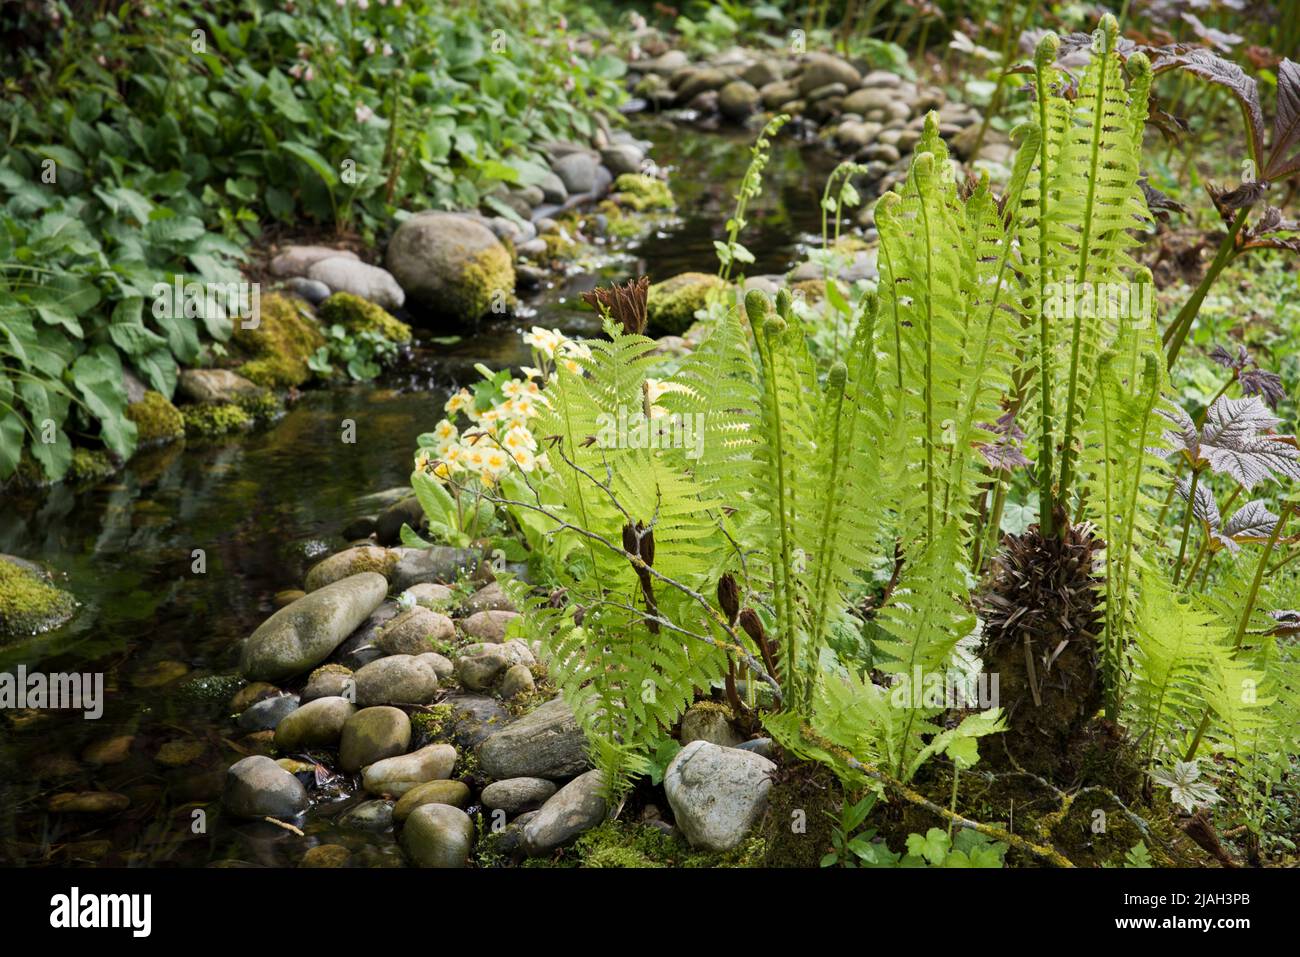 A wetland fern by the edge of a garden pond Stock Photo